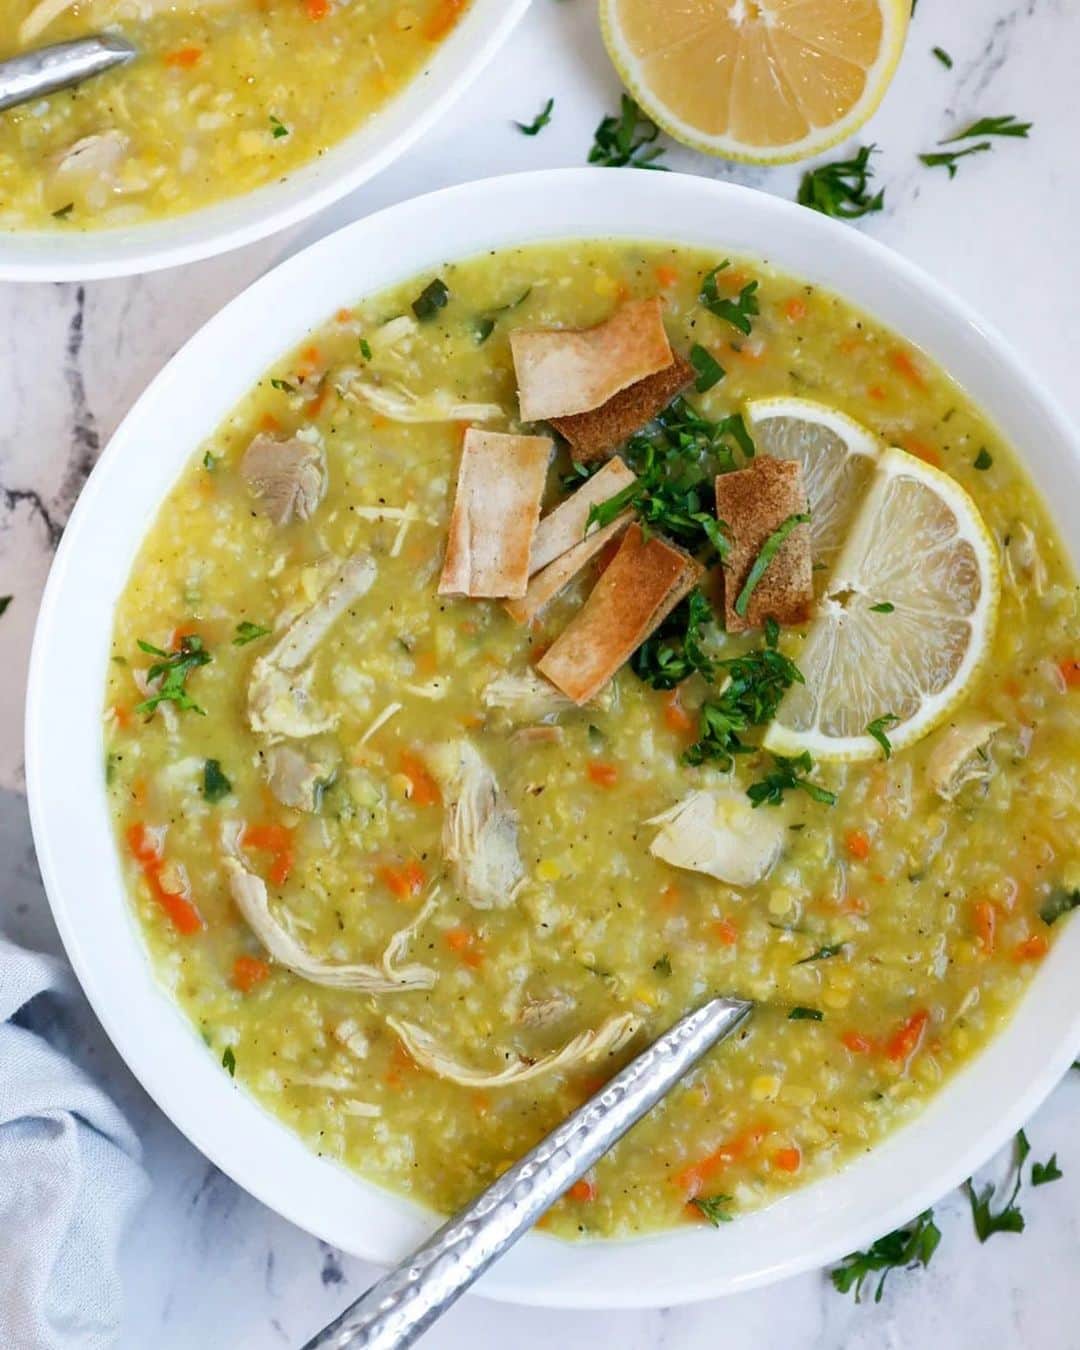 Easy Recipesのインスタグラム：「One of my most favorite soups is Lebanese Chicken Lentil Soup. Similar to my Lebanese Lentil Soup (Shorbet Adas), this chicken lentil soup uses a ton of pantry staples and wholesome ingredients. However, it’s a little more hearty than the lentil soup alone as it has the addition of the shredded chicken. So flavorful and easy to make, you’ll definitely want to bookmark this to make later. You can enjoy this as a full meal in itself or as a side of soup instead.  Full recipe link in my bio @cookinwithmima  https://www.cookinwithmima.com/chicken-lentil-soup/」